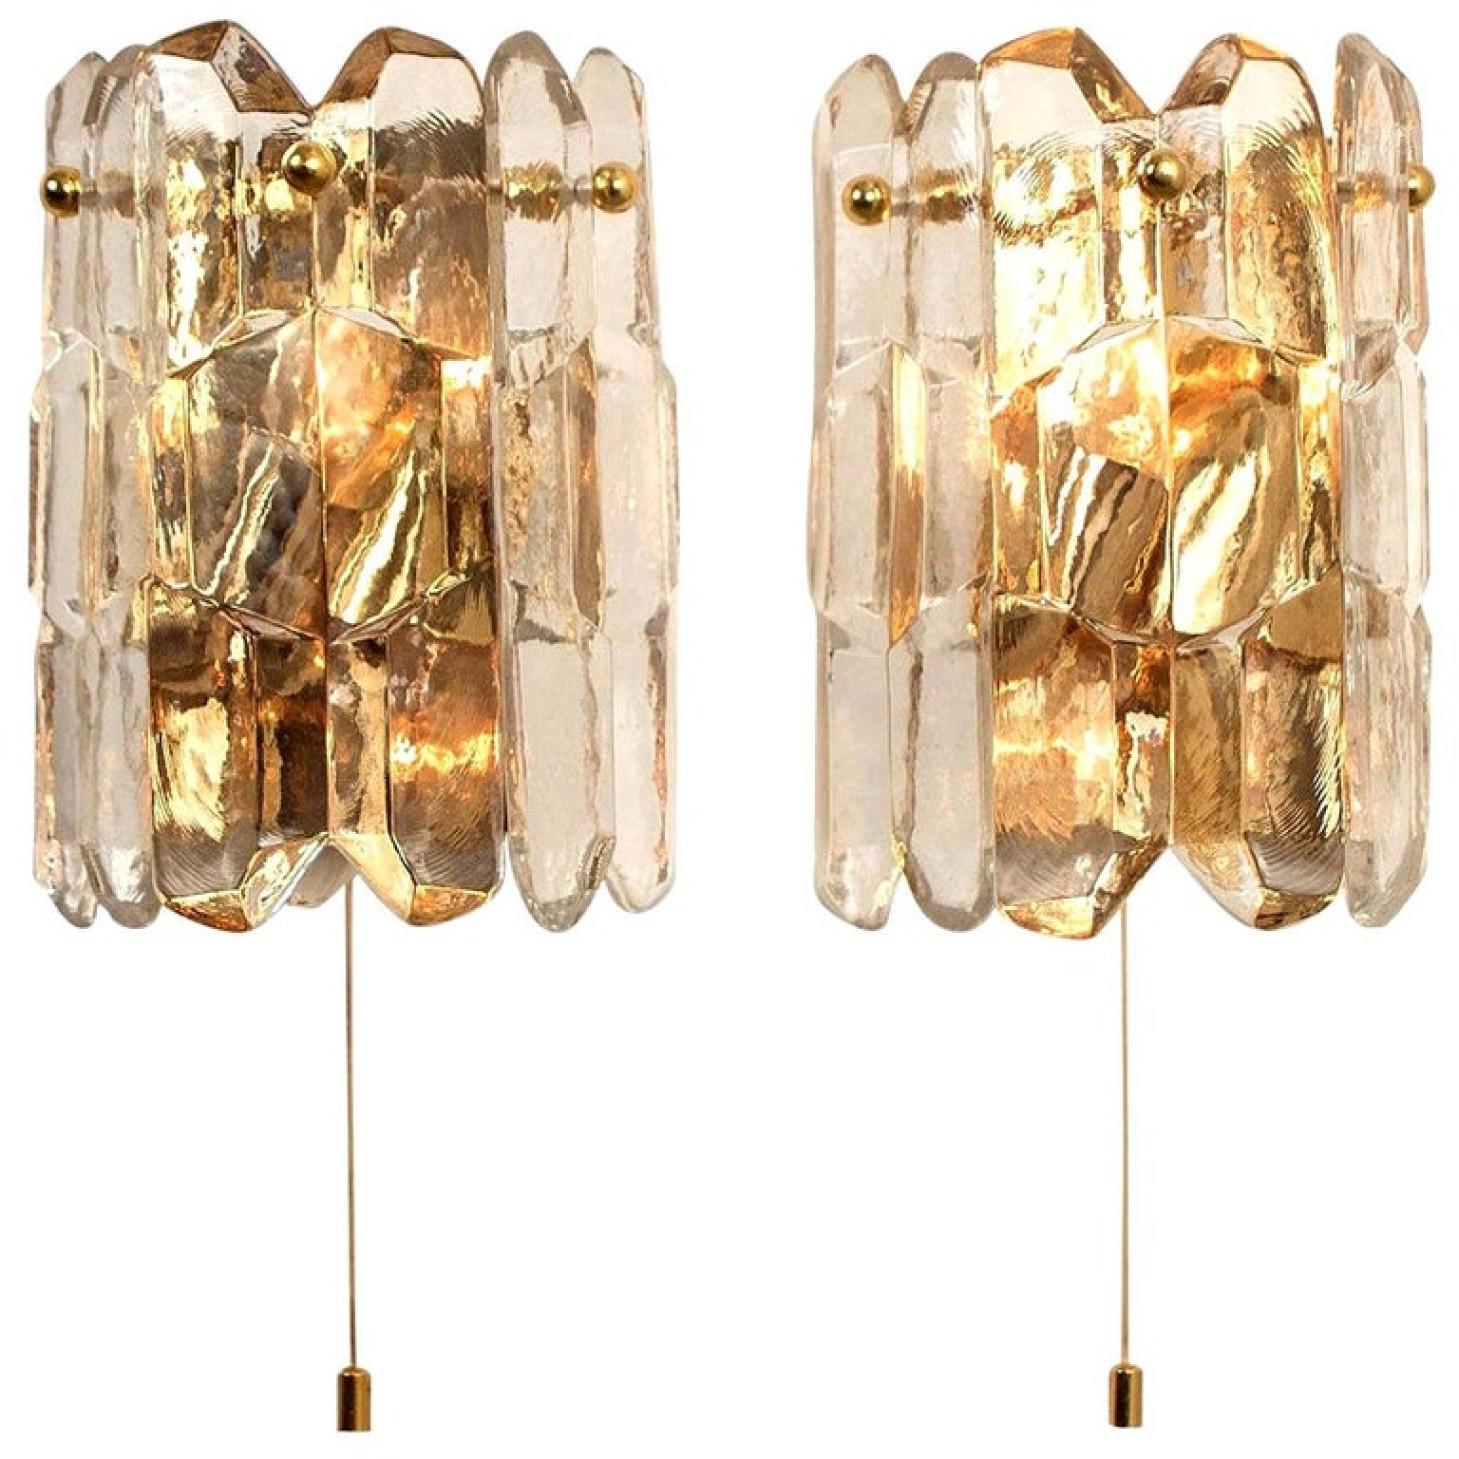 A pair of high-end and handmade gilt brass 24-karat gold-plated wall lights made by Kalmar in Austria. This model 